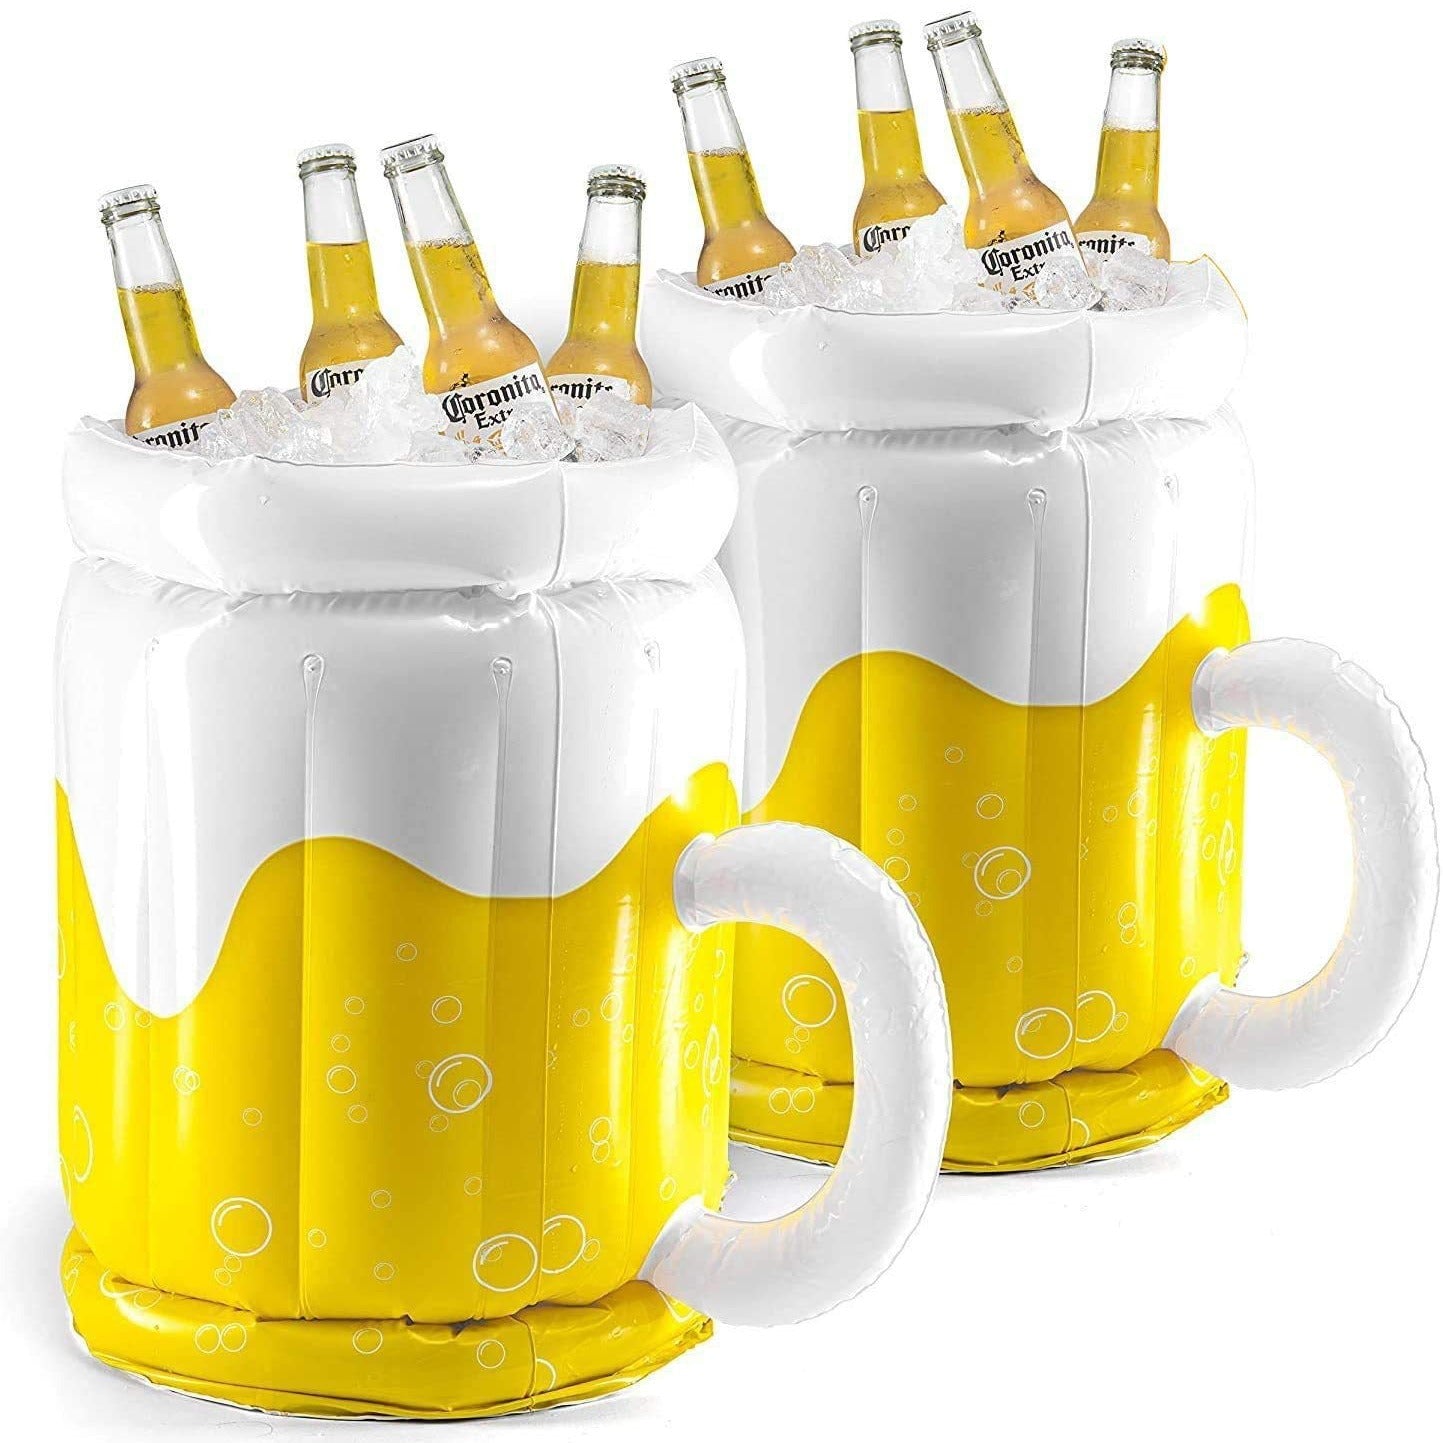 PVC inflatable ice bucket beer glass inflatable ice bar water drink